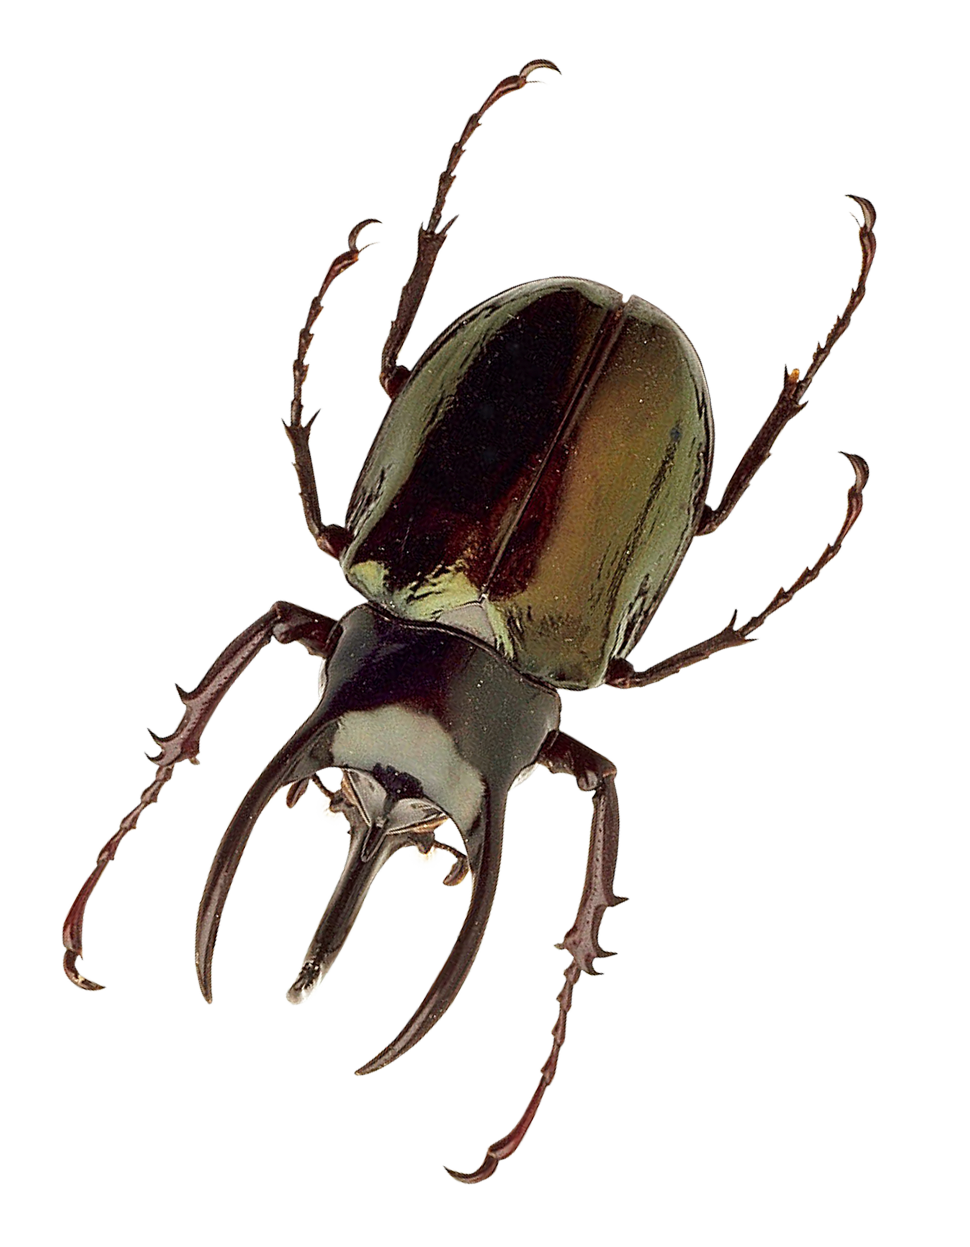 Insect High Quality PNG